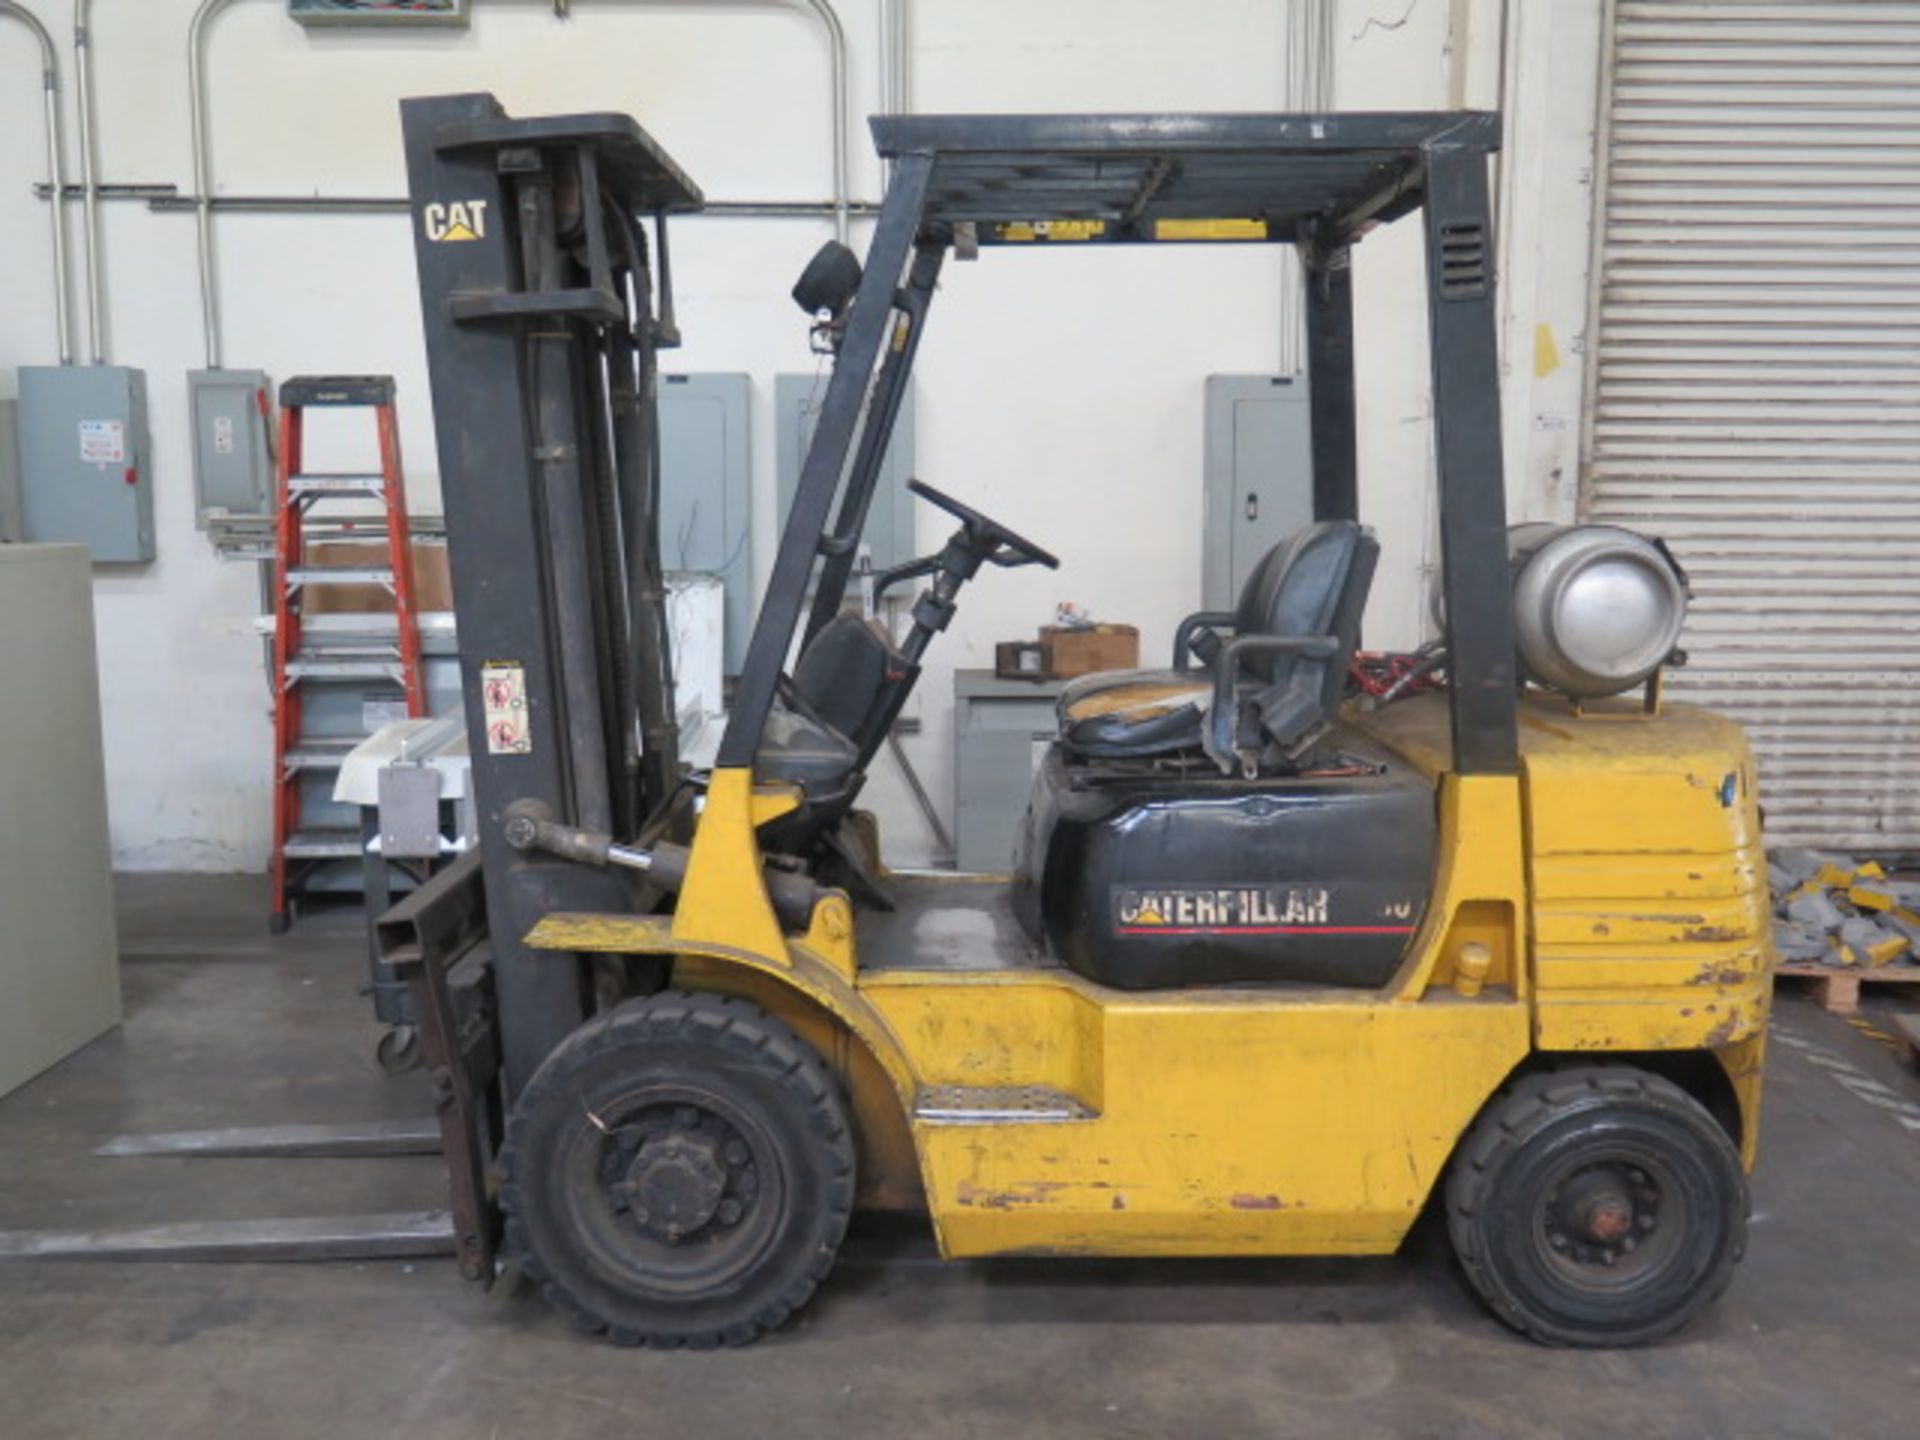 Caterpillar GP25 5000 Lb Cap LPG Forklift s/n 5AM07772 w/ 3-Stage Mast, 190” Lift Height, SOLD AS IS